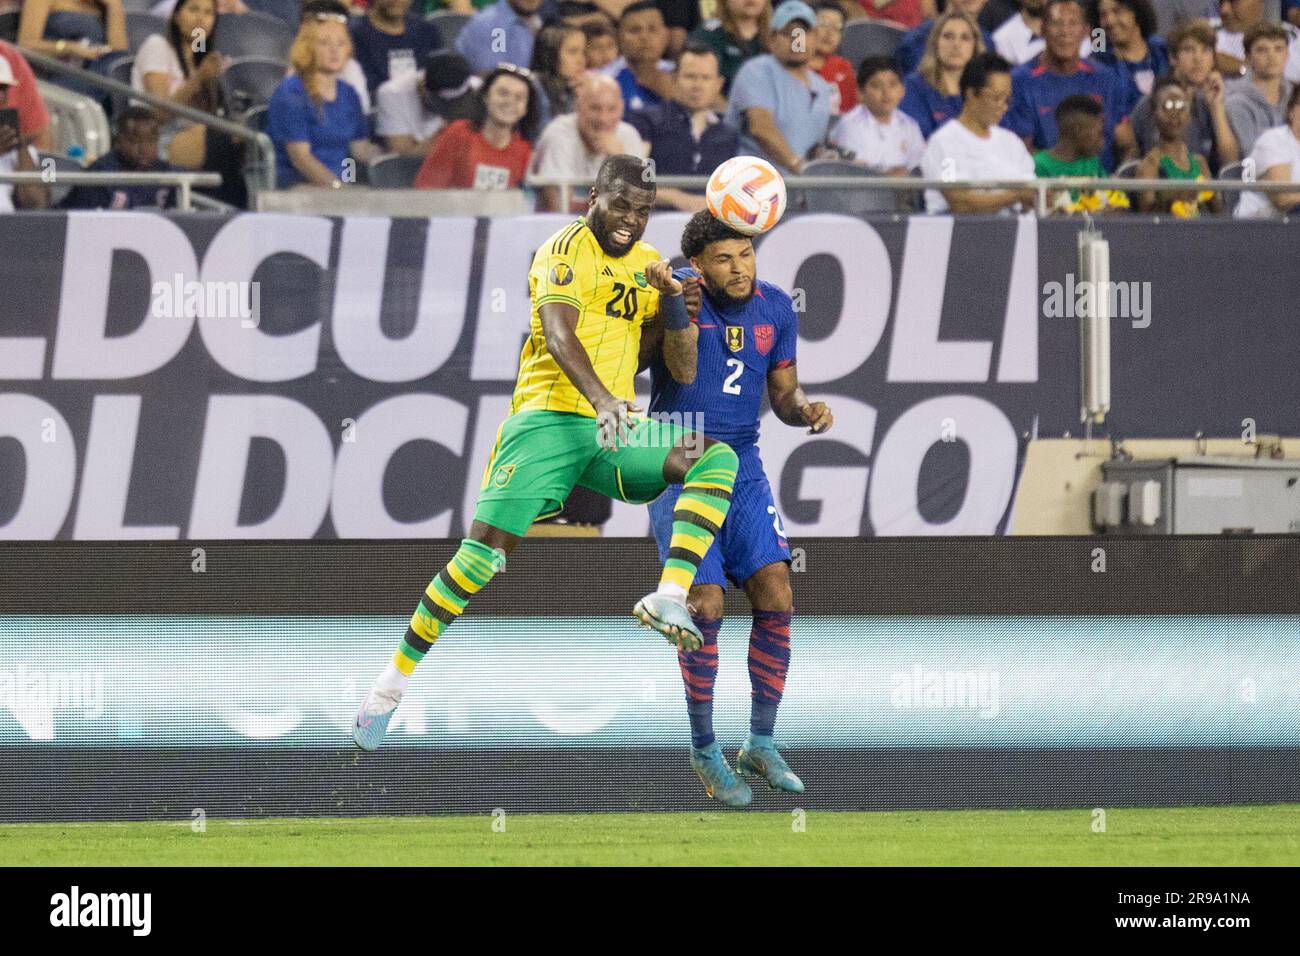 Chicago, USA. 24th June, 2023. Chicago, USA, June 24, 2023: Kemar Lawrence (20 Jamaica) and Deandre Yedlin (2 U.S. Men's National Soccer Team) jumps for a header during the CONCACAF Gold Cup football match between the U.S. Men's National Soccer Team and Jamaica on Saturday June 24 at Soldier Field, Chicago, USA. (NO COMMERCIAL USAGE). (Shaina Benhiyoun/SPP) Credit: SPP Sport Press Photo. /Alamy Live News Stock Photo